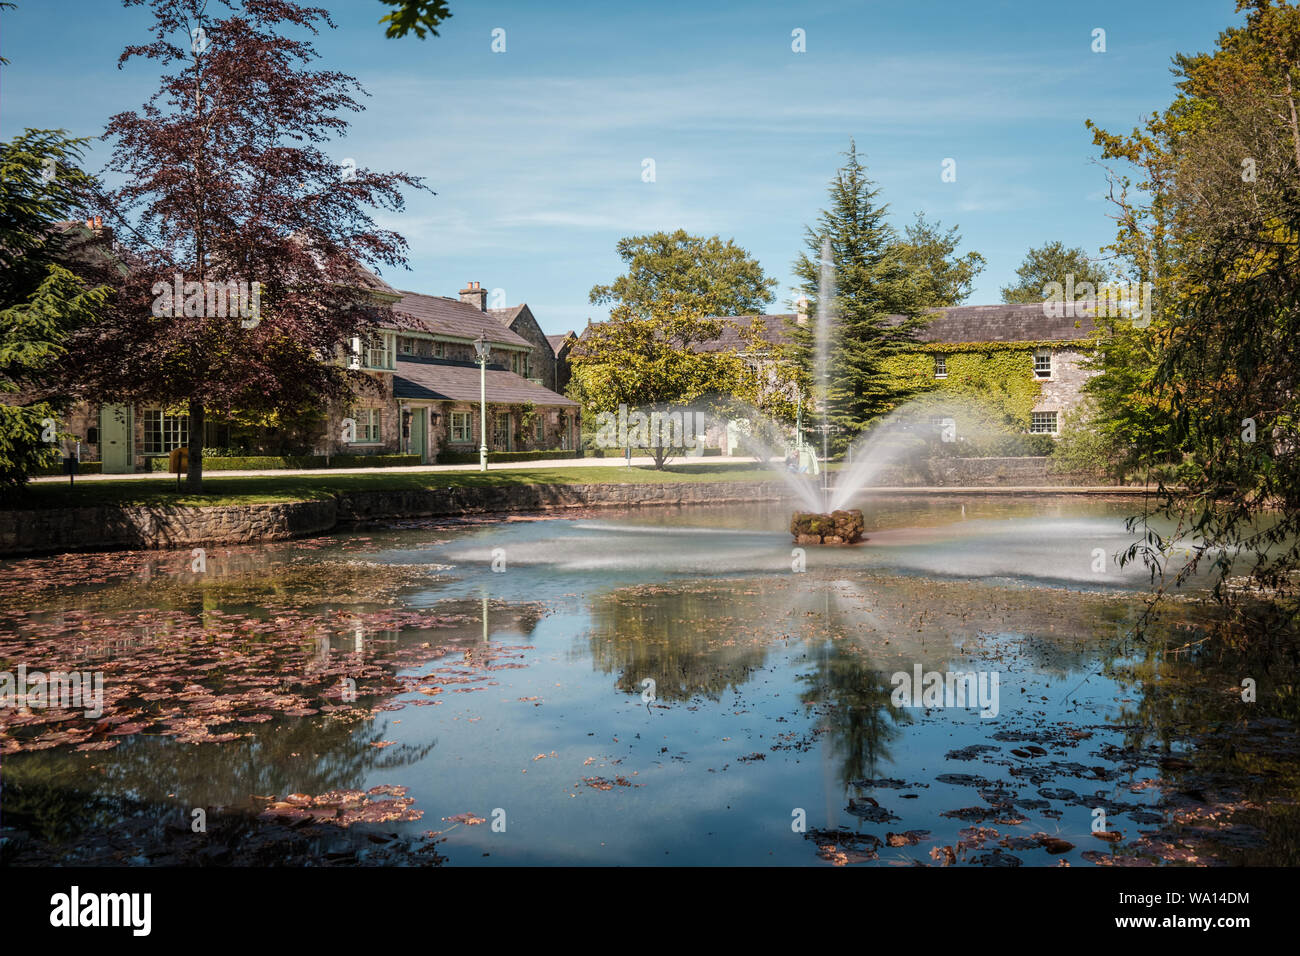 Cliff at Lyons, Celbridge, Kildare, Ireland - 13th May 2019. A water fountain forms a dramatic centrepiece to the lake at Cliff at Lyons hotel in Kild Stock Photo